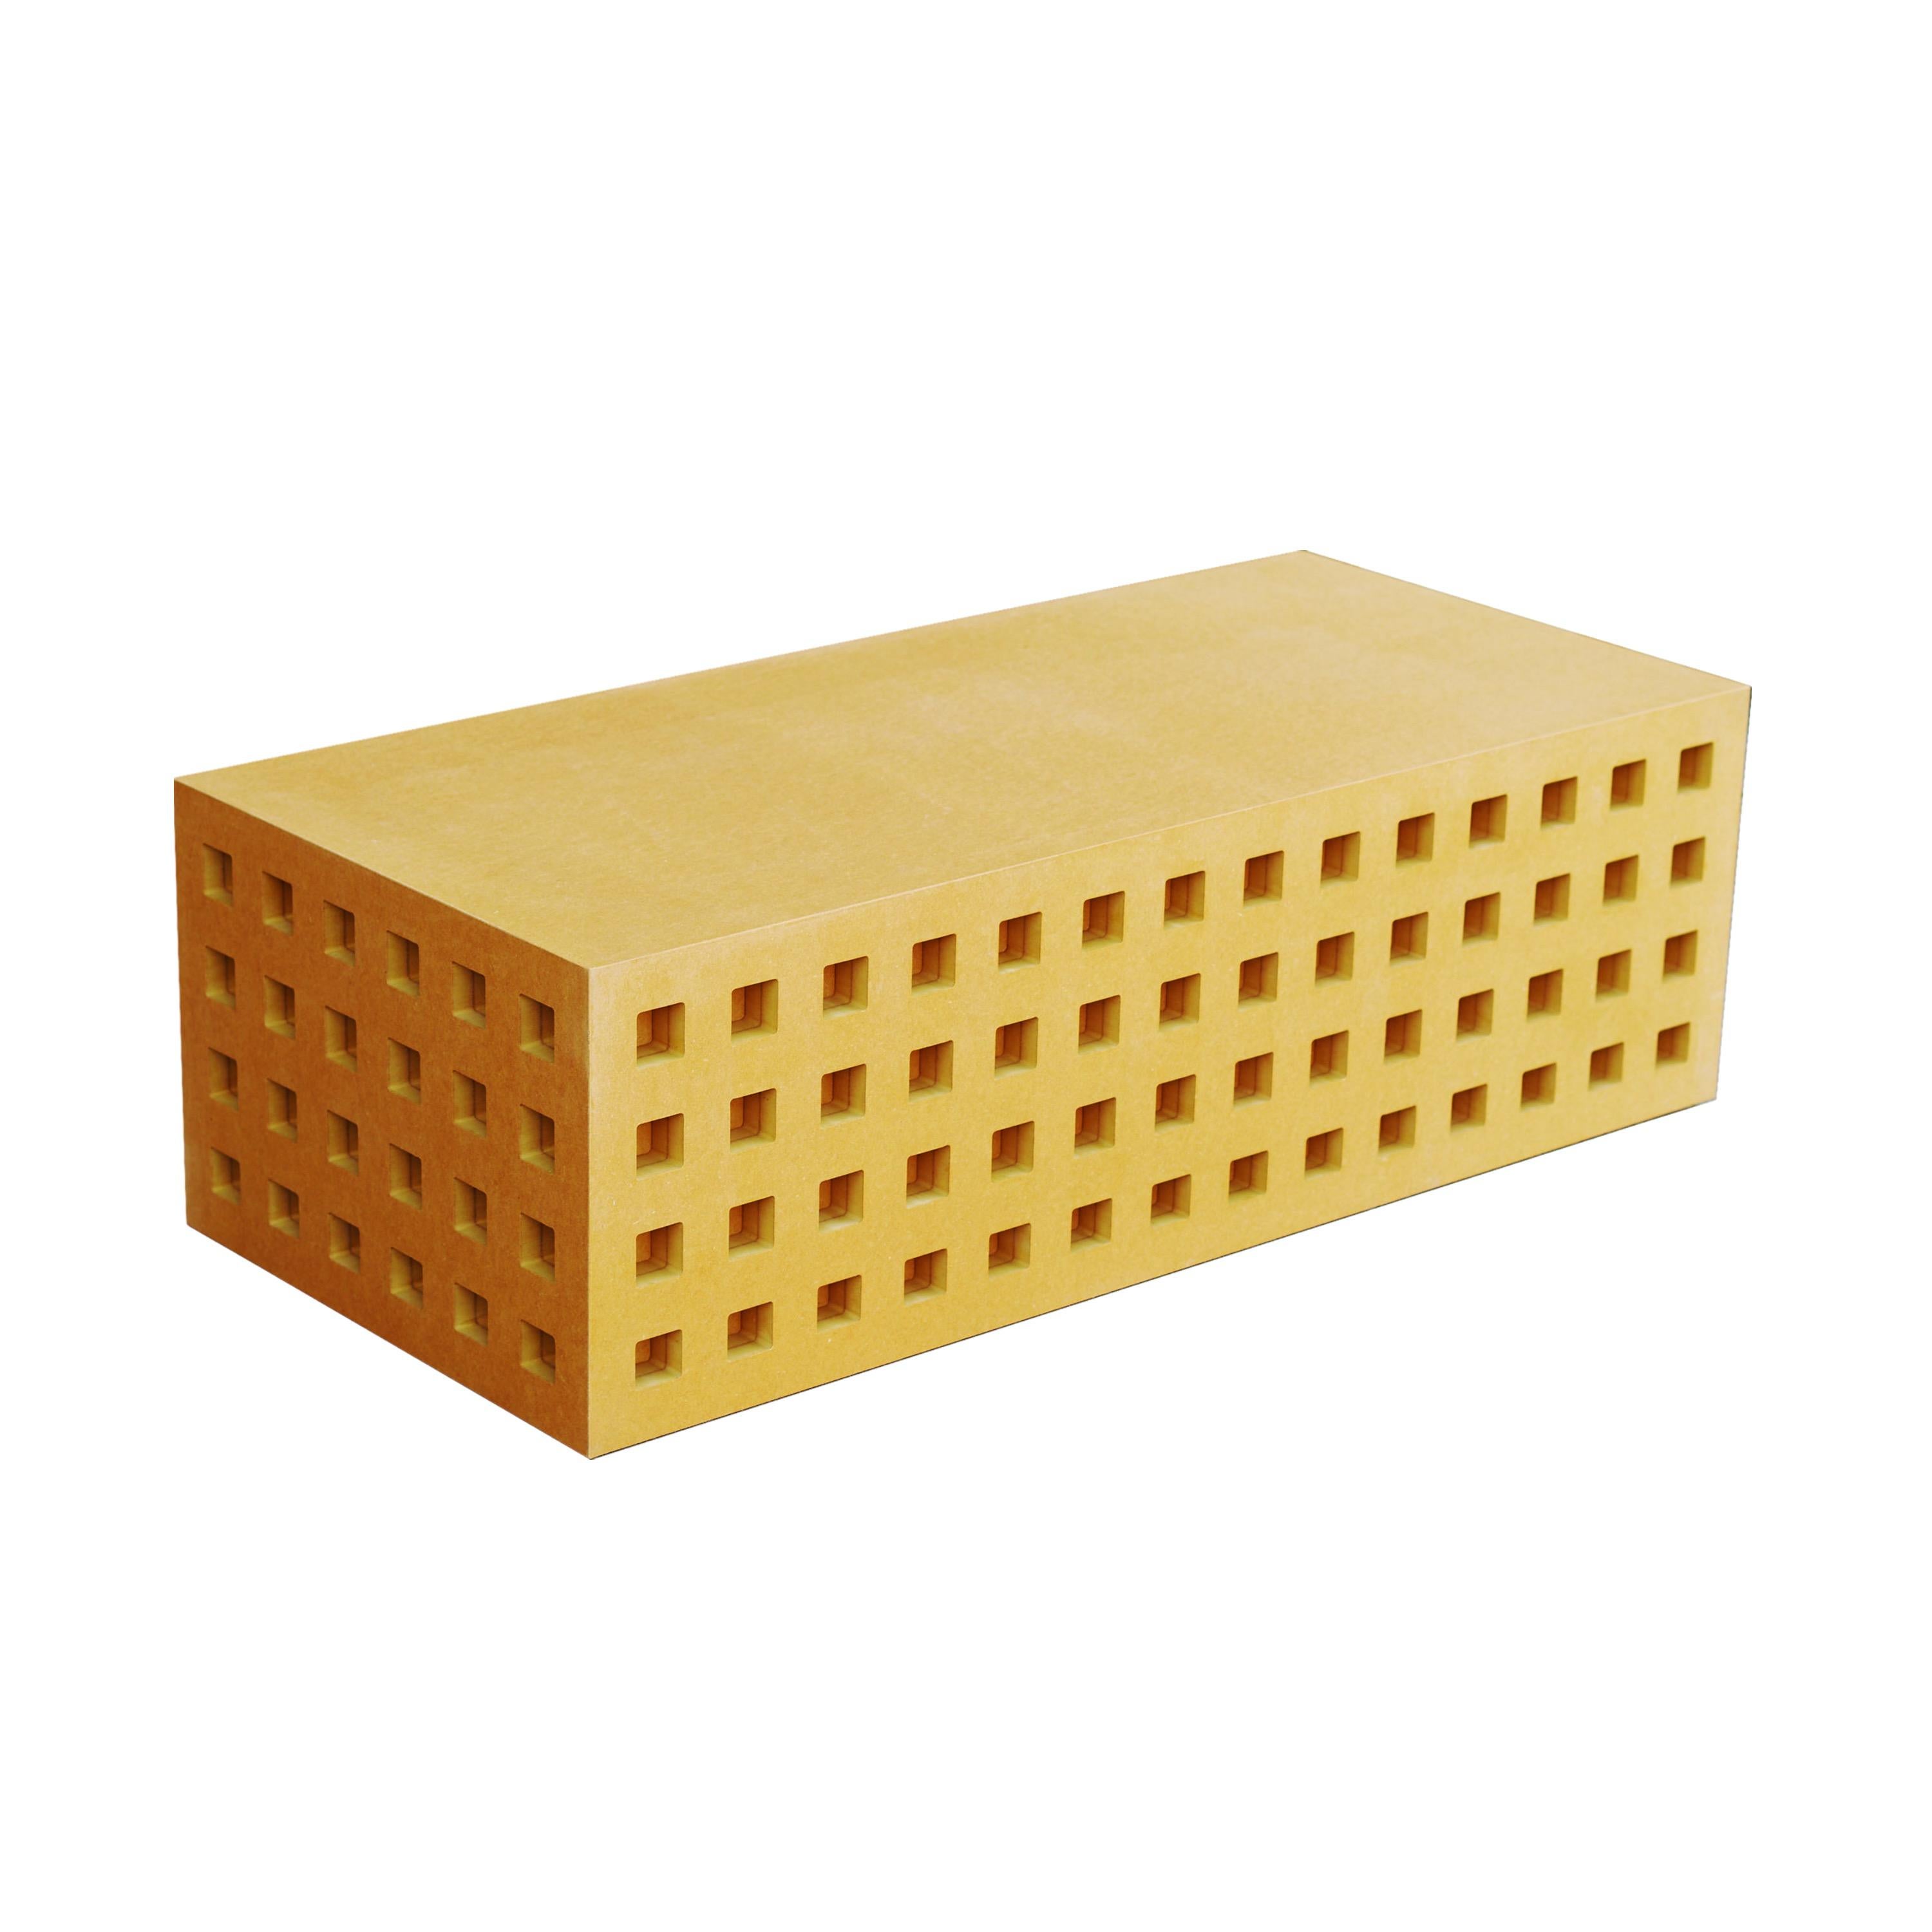 Condos Table is a coffee table inspired by Aldo Rossi and Brutalist apartment blocks, made of organically dyed wood fibreboard with a cement appearance. 
Material: Yellow Valchromat (shown) with MDF structure.